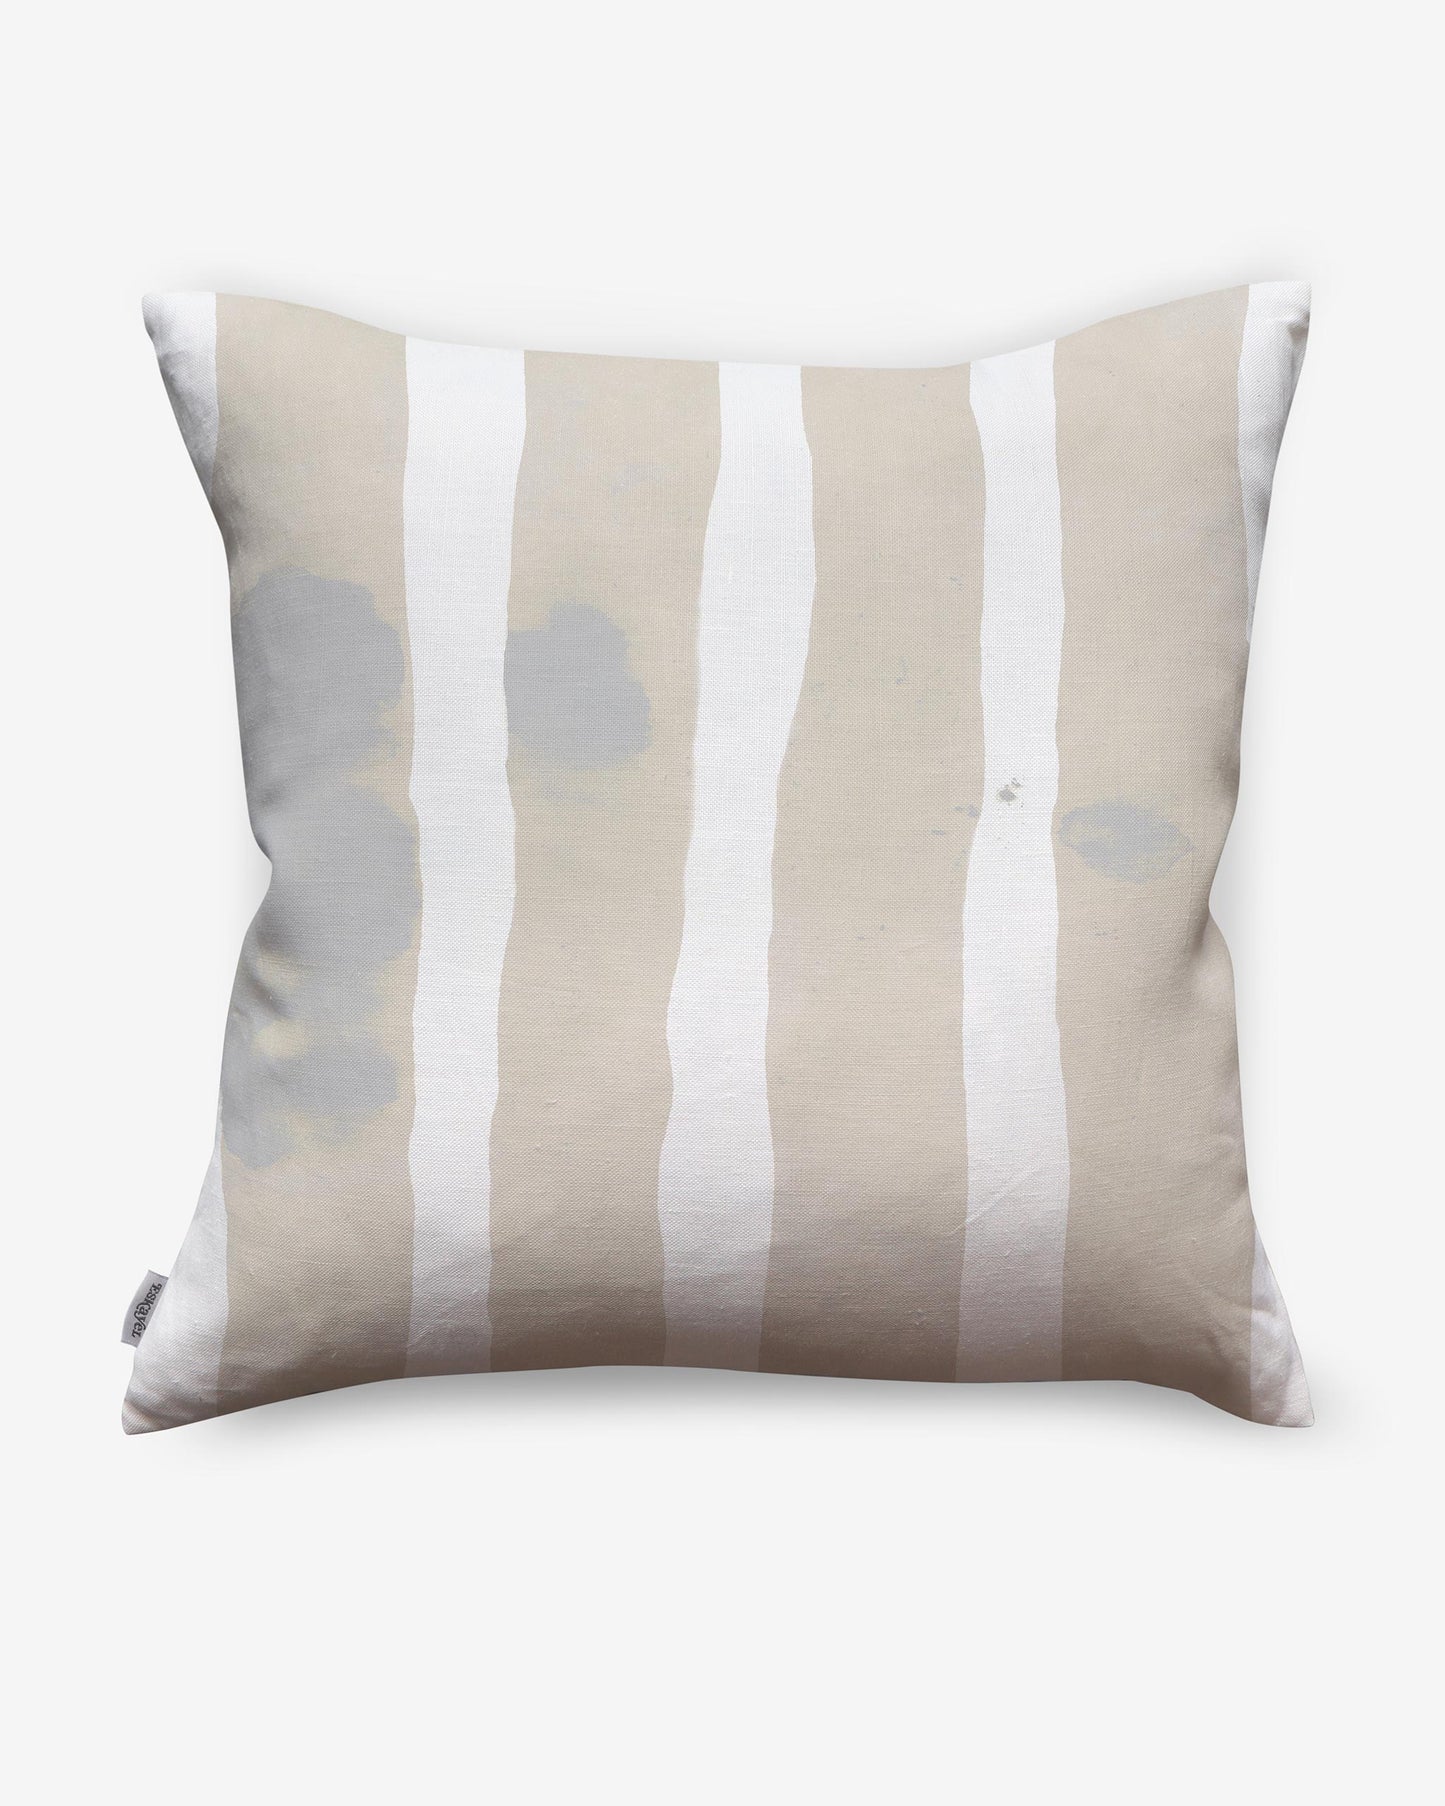 A Bold Stripe Pillow Sand with striped patterns that combine beige and white colors on it